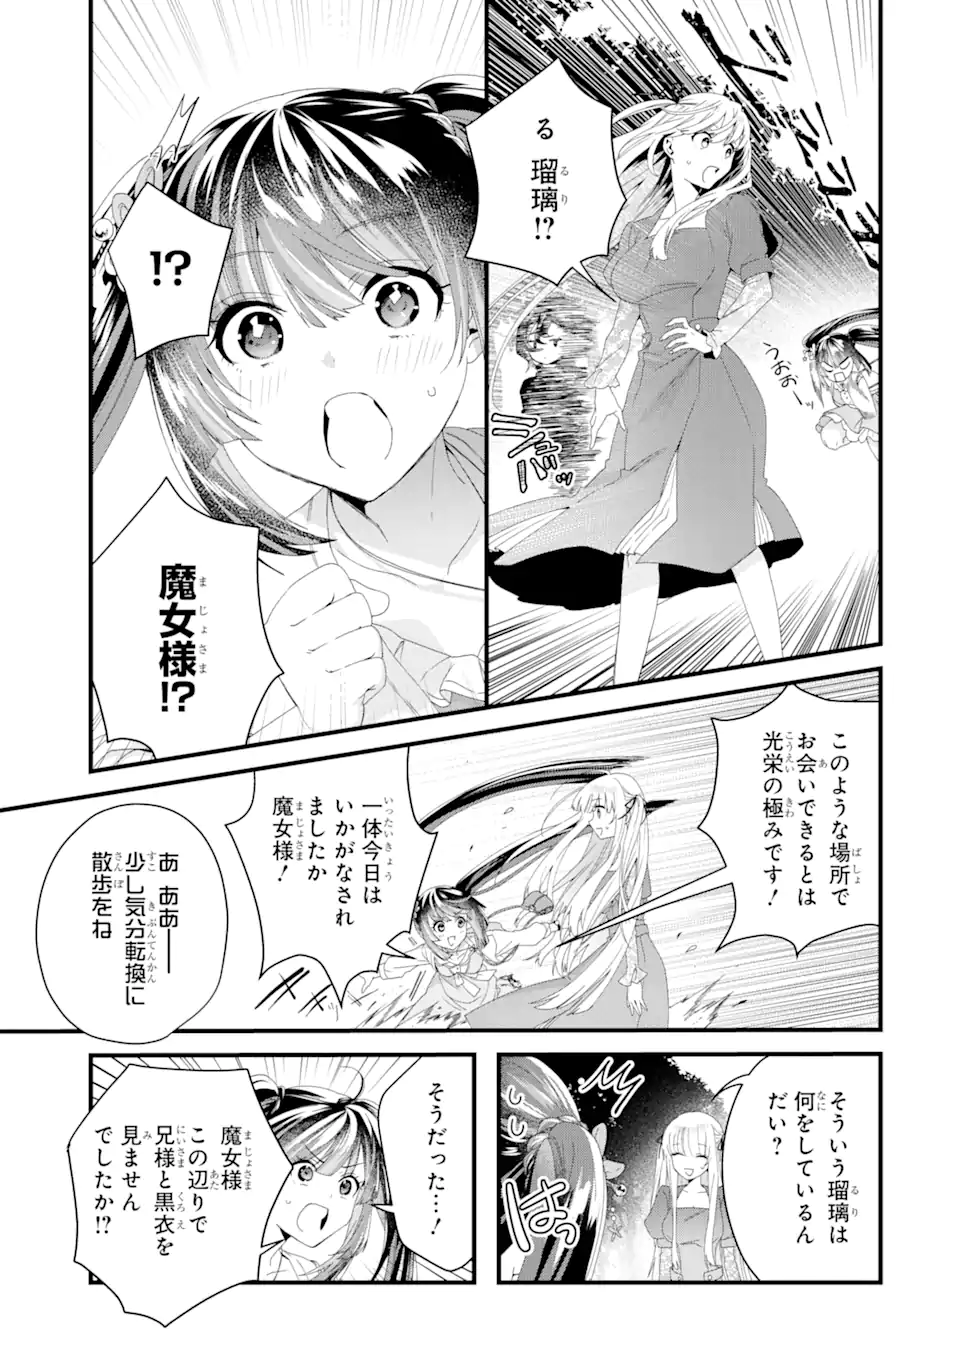 Ousama no Propose - Chapter 10.3 - Page 1